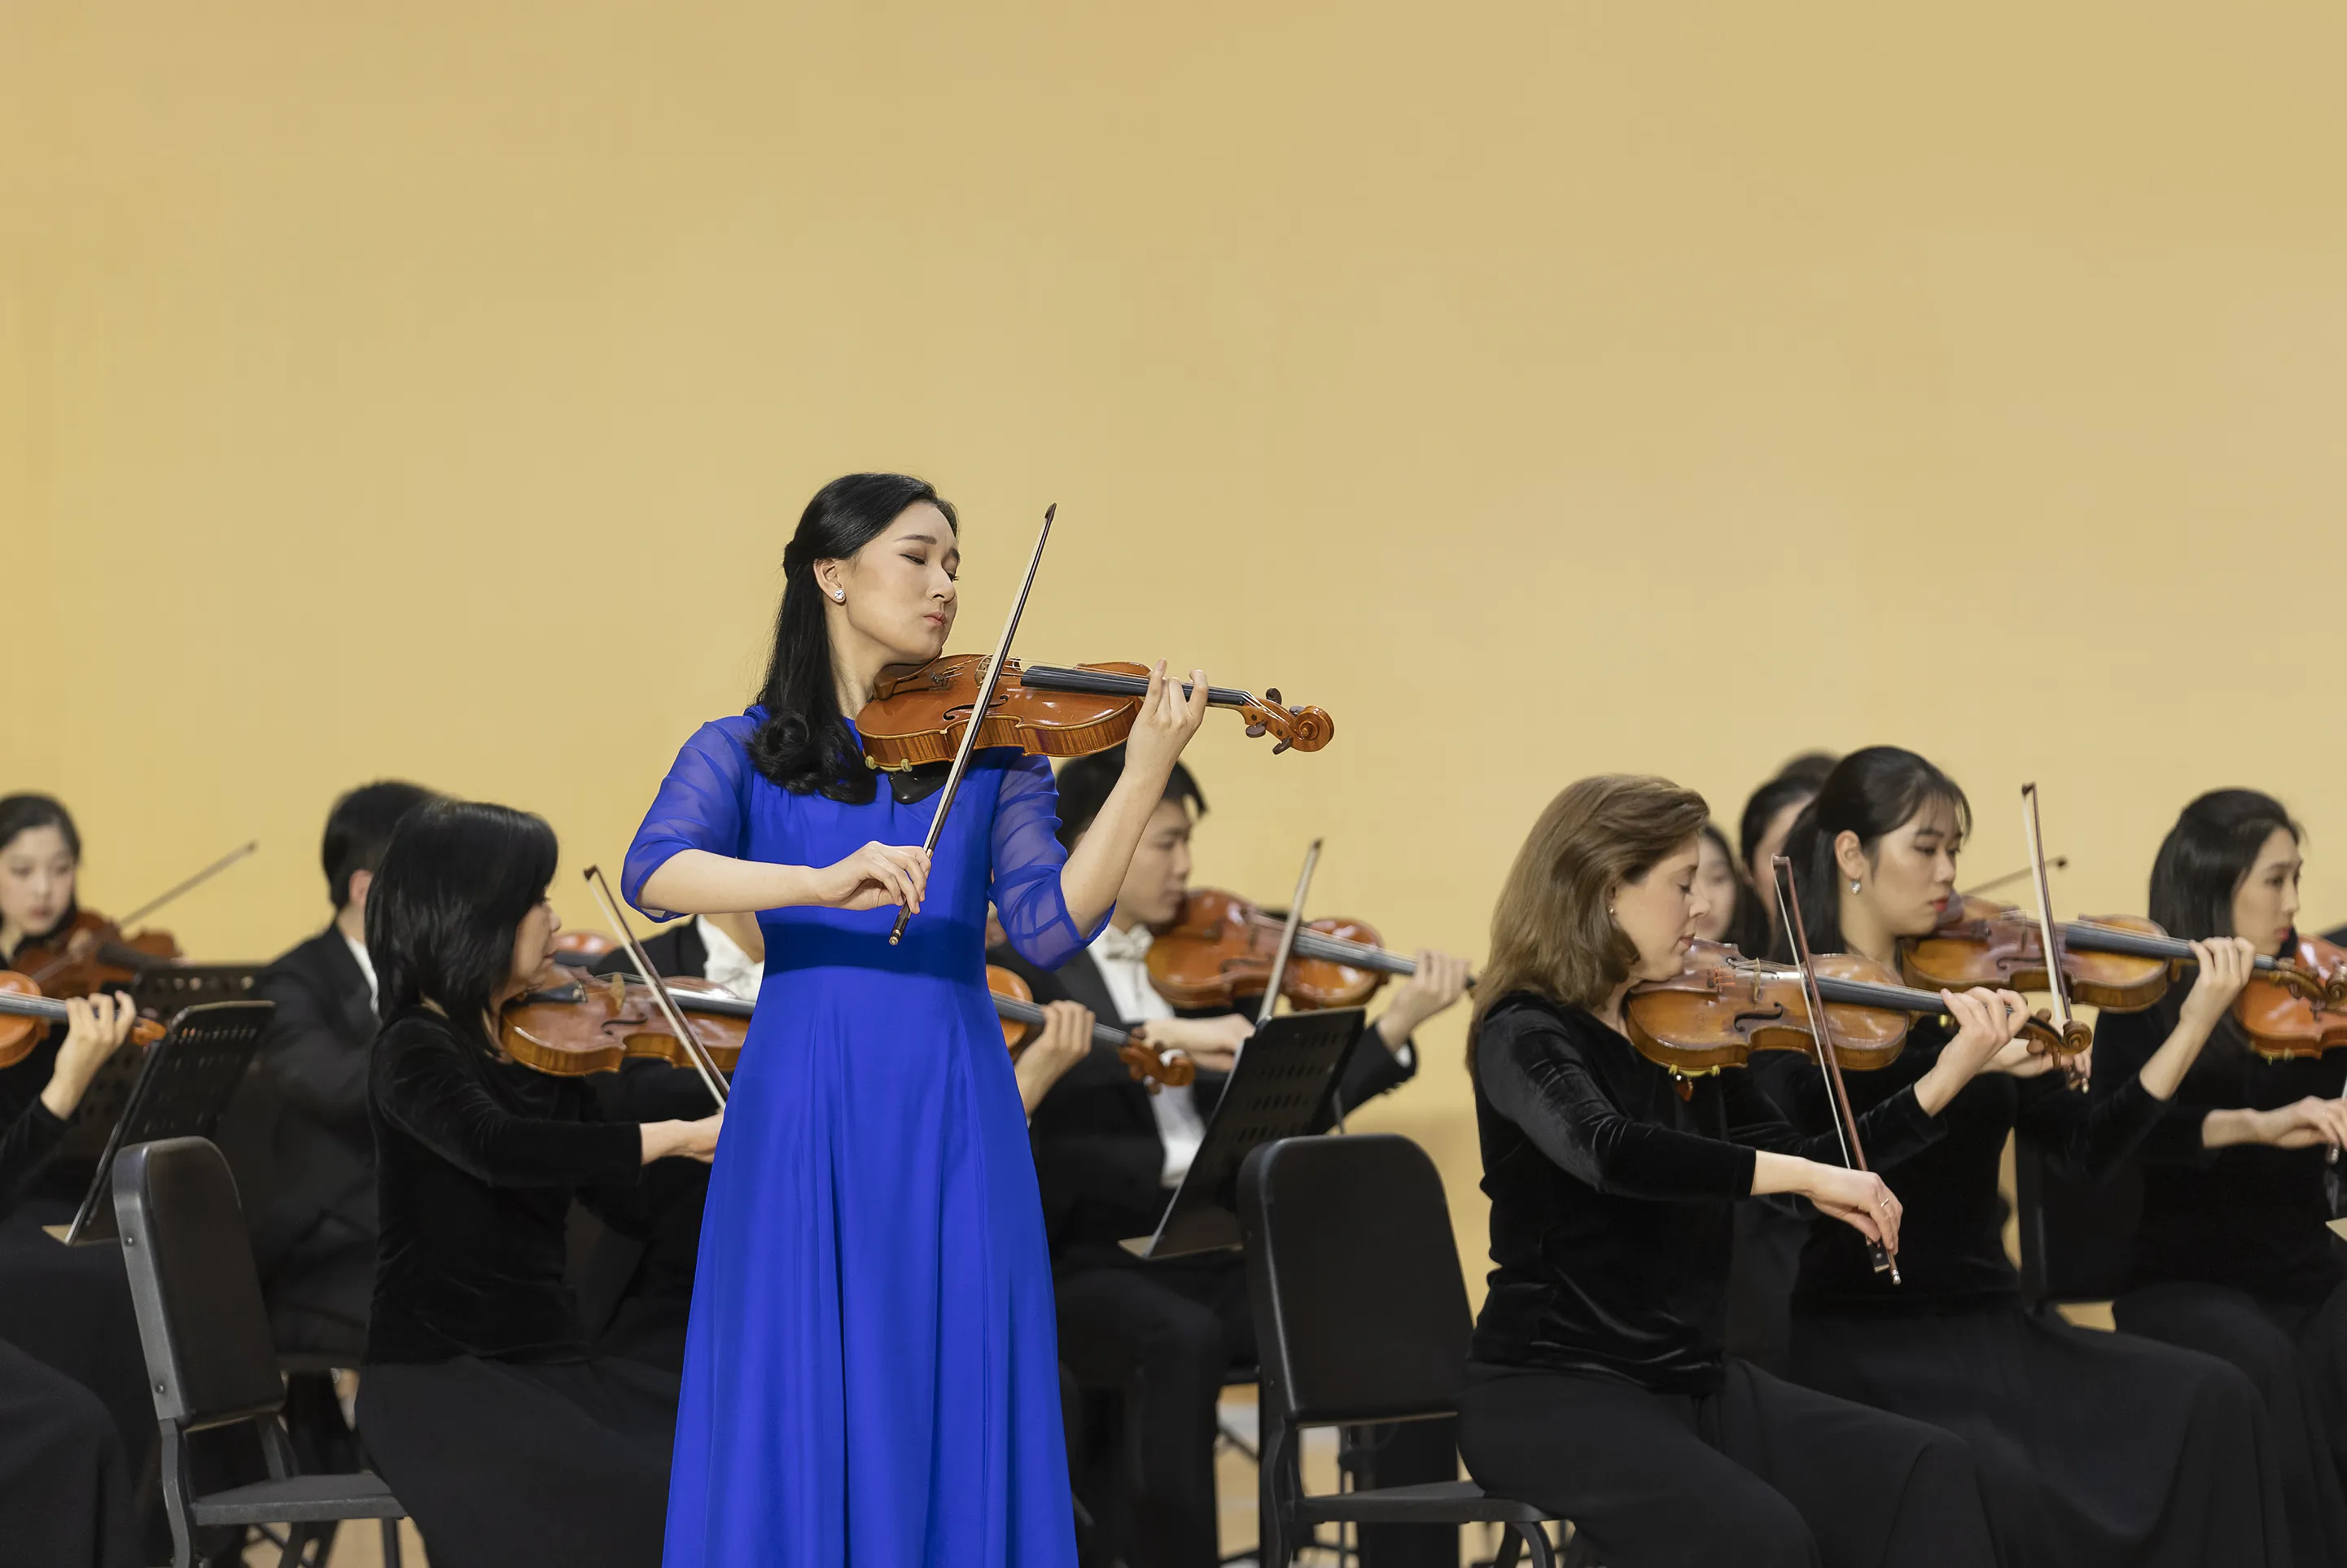 Shen Yun Symphony Orchestra to Feature ‘Butterfly Lovers’ Violin Concerto in Lincoln Center Performance